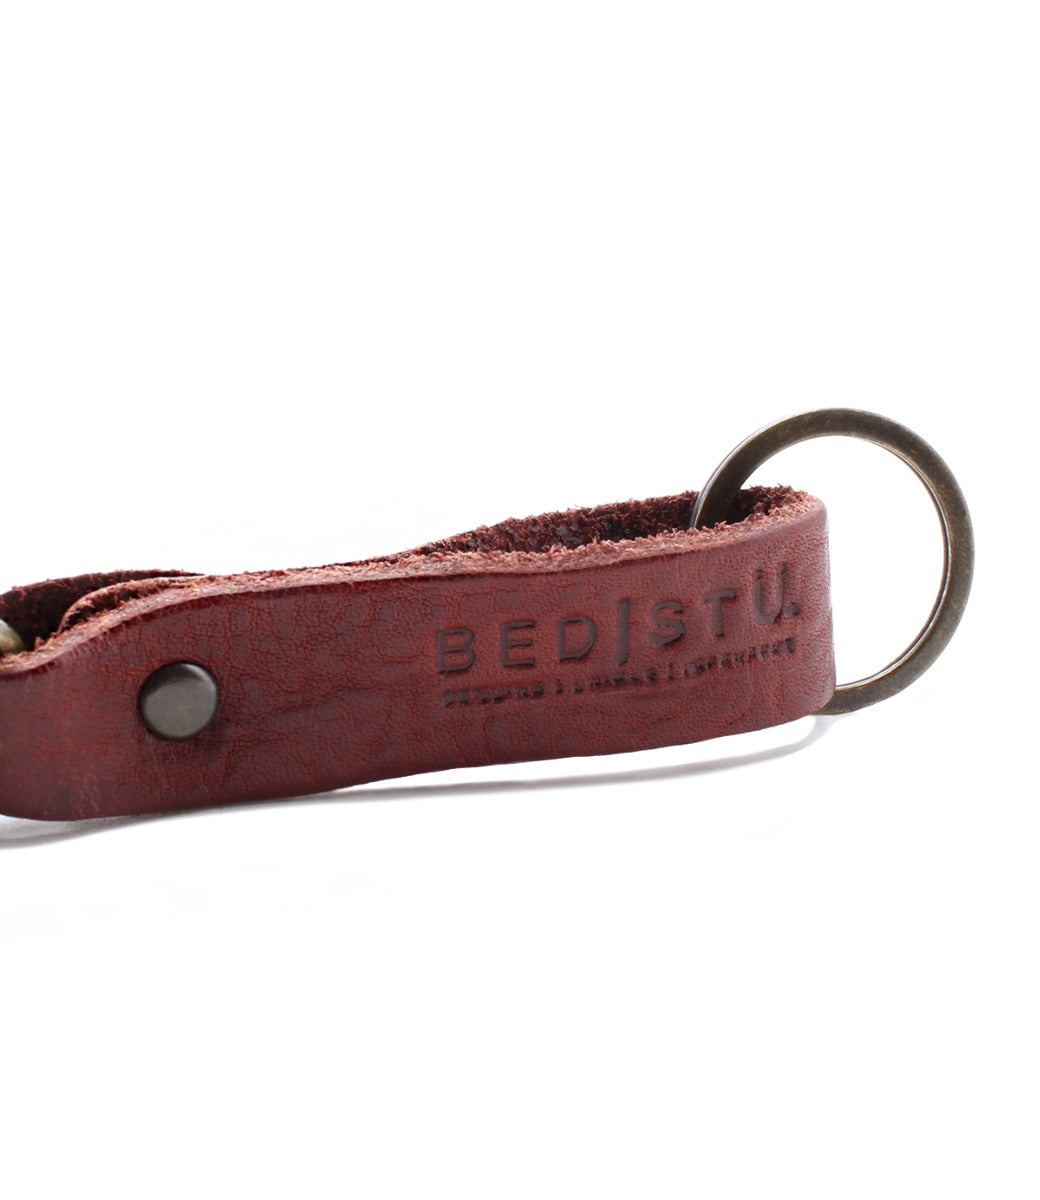 A leather Keygrab with the brand name Bed Stu on it.